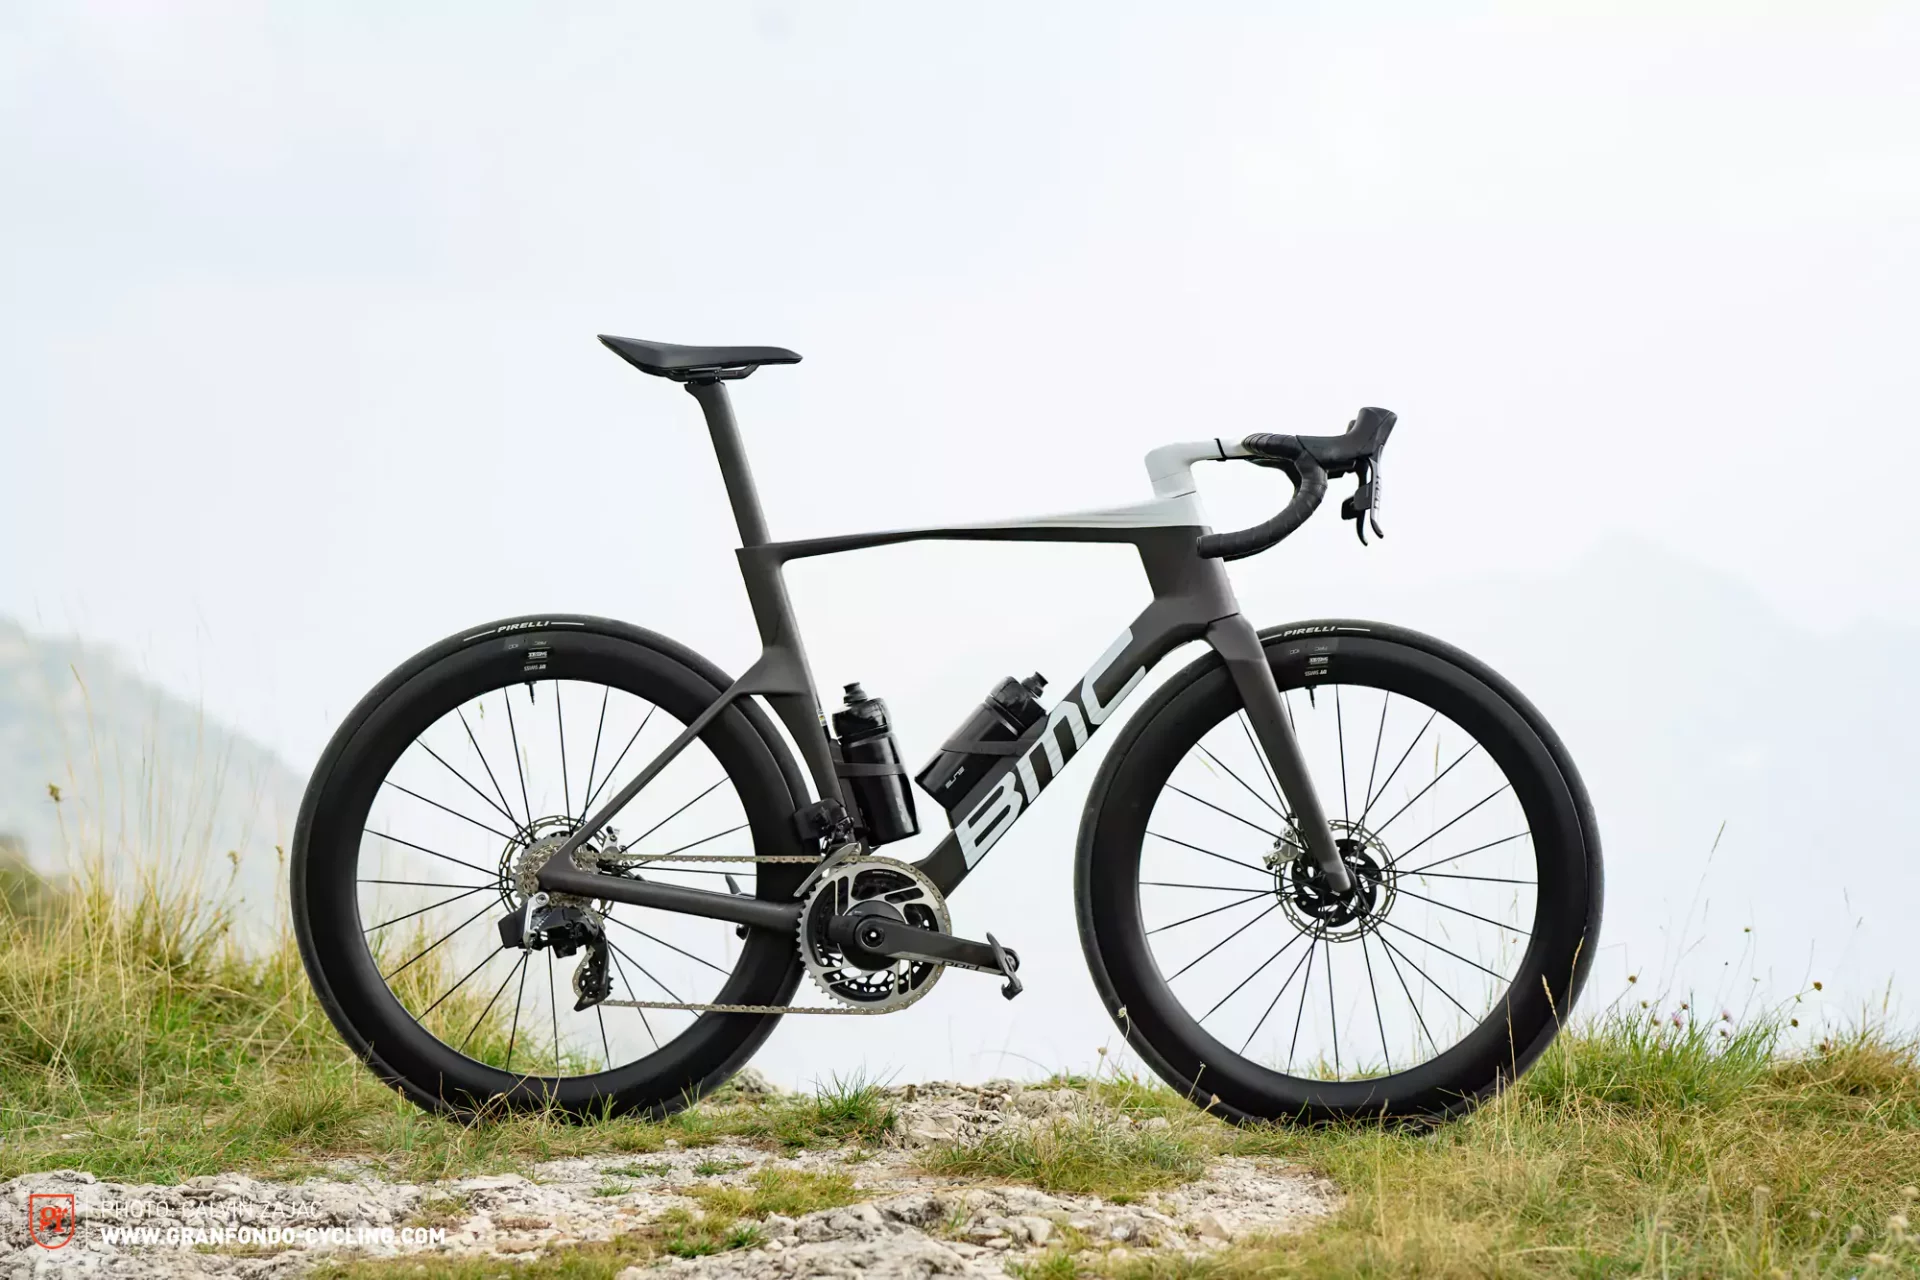 first-ride-review:-the-new-bmc-teammachine-r-– with-red-bull-formula-1-technology